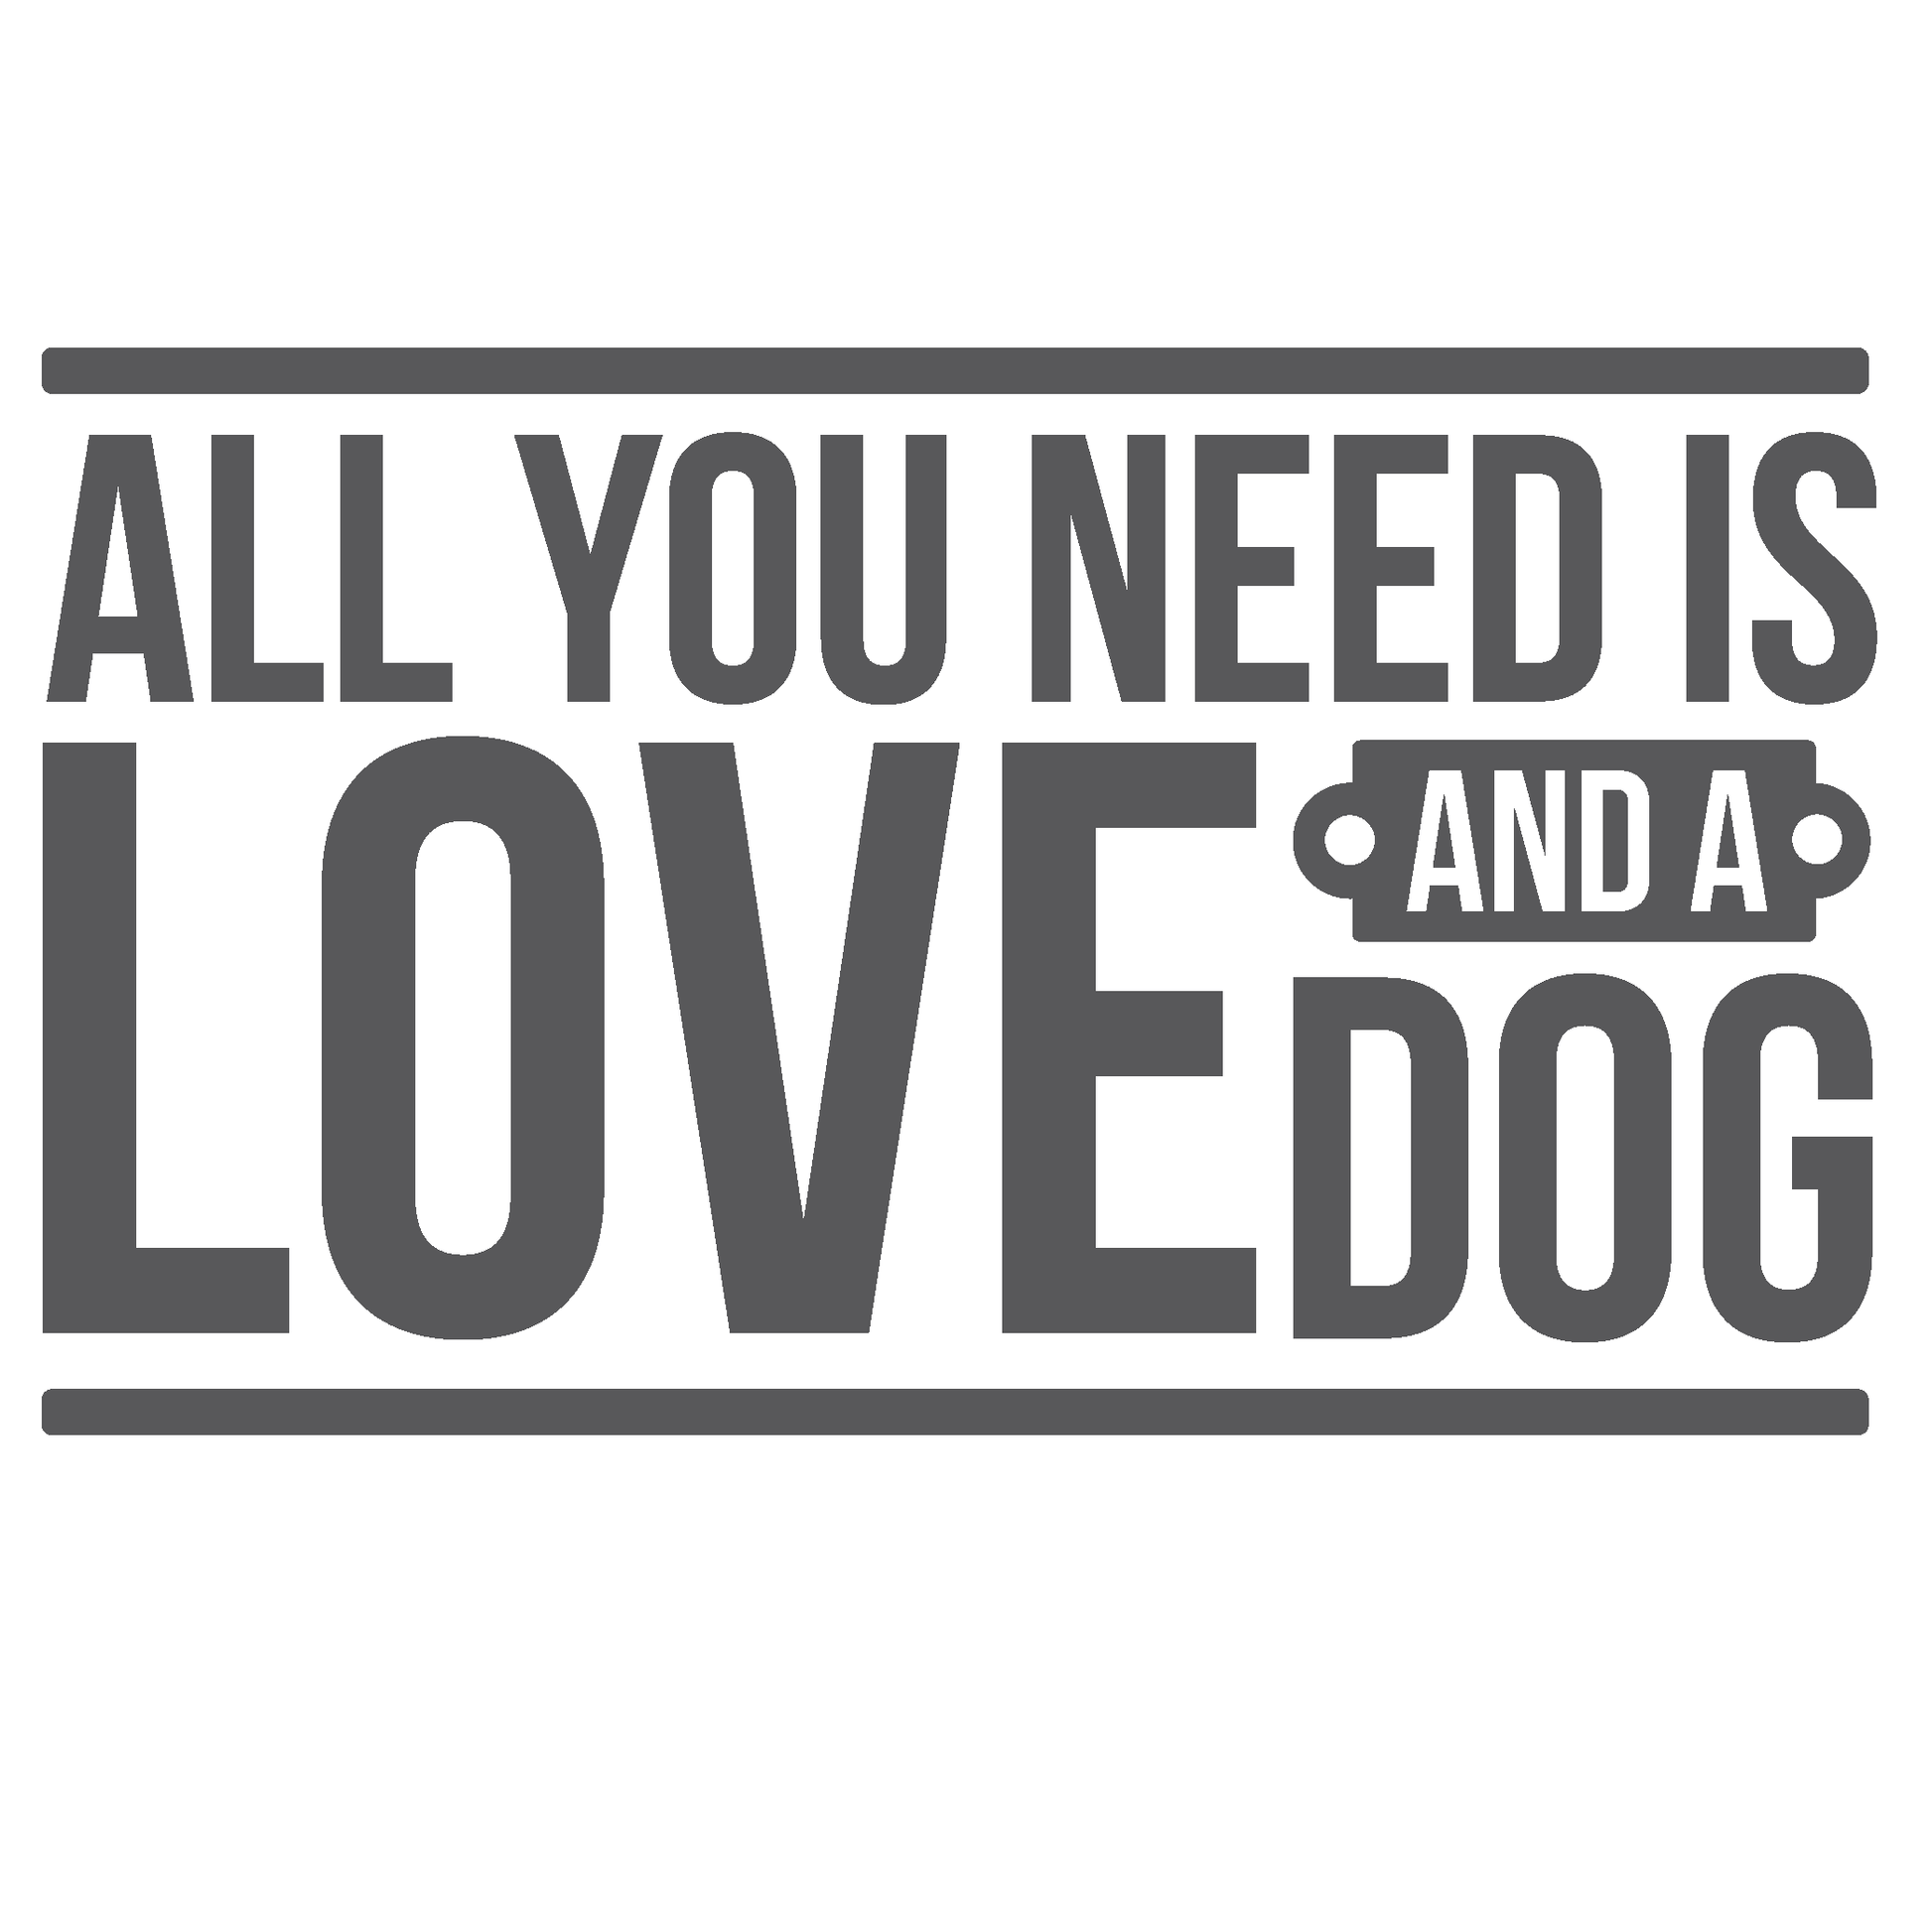 ShopVinylDesignStore.com All You Need Is Love And A Dog Wide Shop Vinyl Design decals stickers